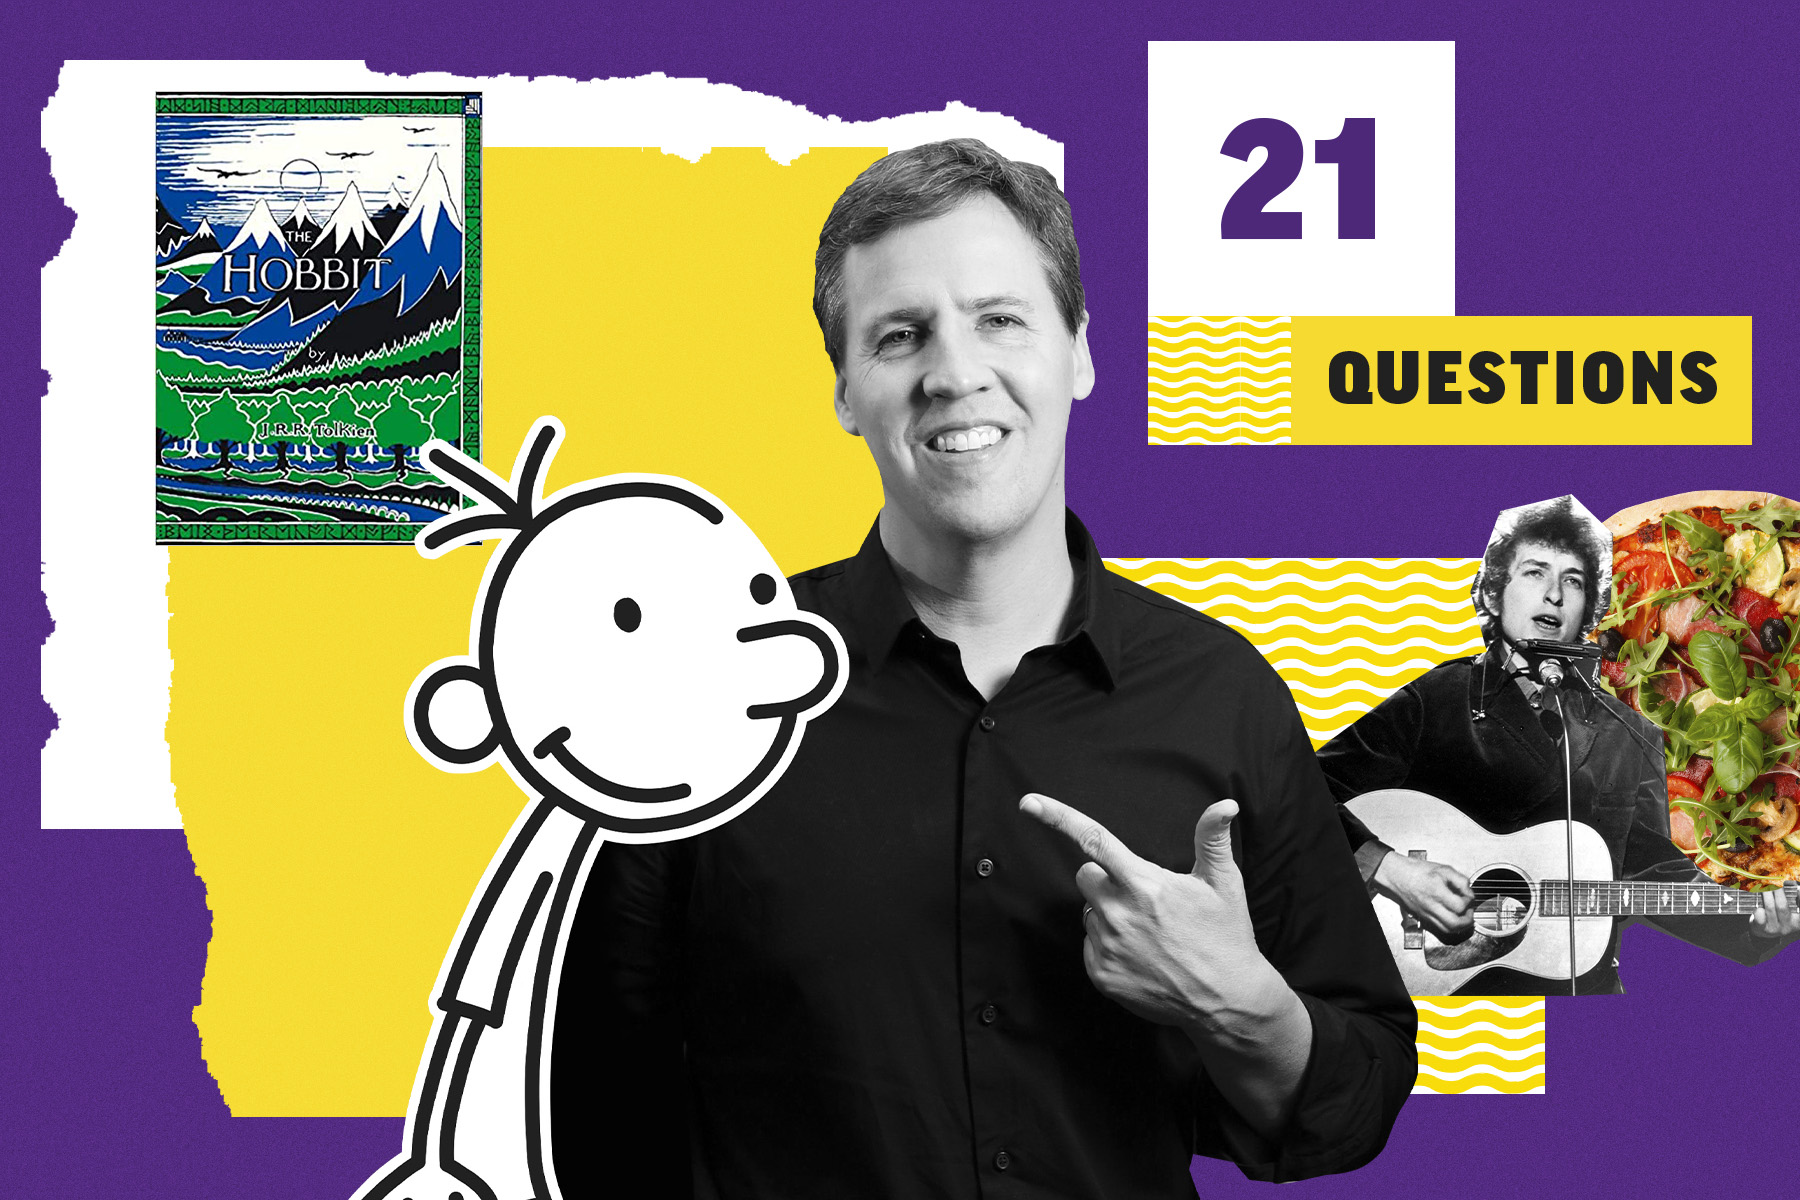 A photograph of author Jeff Kinney against a purple background, overlaid with the article title 21 Questions